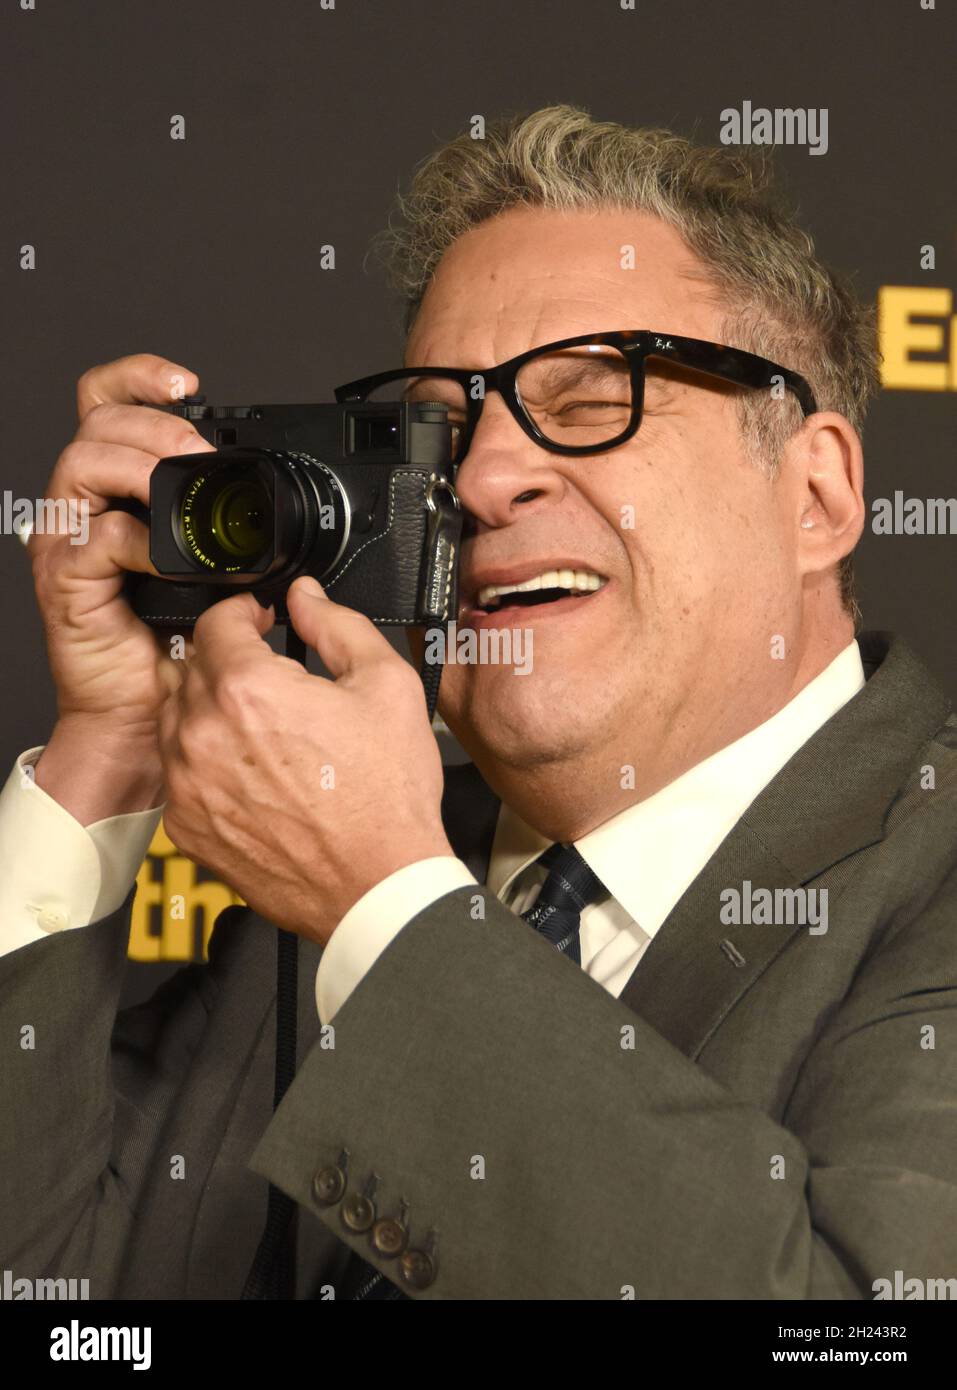 Los Angeles, California, USA 19th October 2021 Actor Jeff Garlin attends HBO's 'Curb Your Enthusiasm' Season 11 Premiere at Paramount Theatre on October 19, 2021 in Los Angeles, California, USA. Photo by Barry King/Alamy Live News Stock Photo